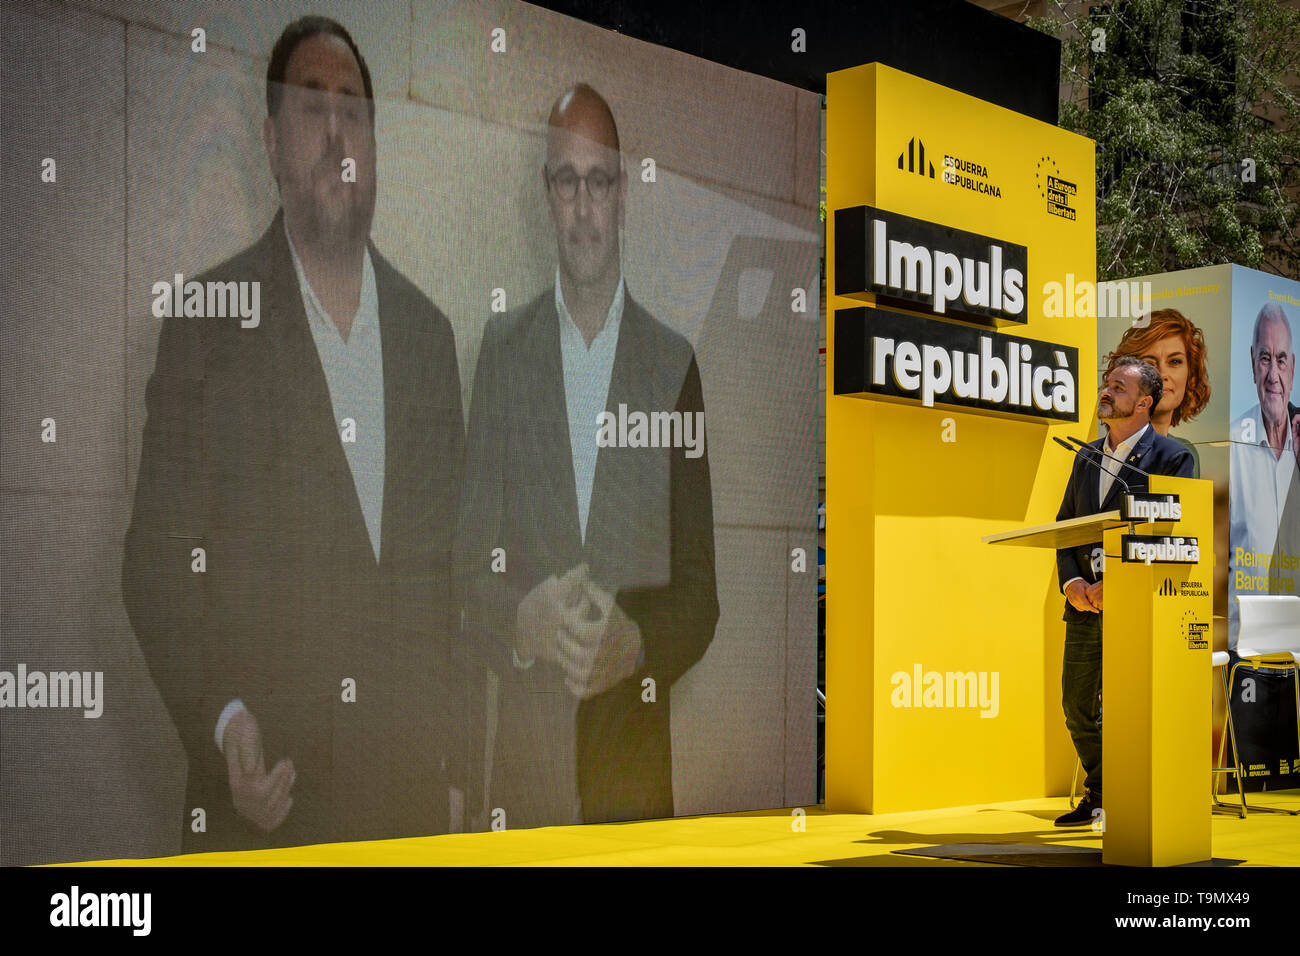 Oriol Junqueras (L) president of ERC and candidate for European elections and Raül Romeva (R) current senator and candidate for municipal, are seen during a video-conference from the Soto del Real prison in Madrid at the election campaign. Esquerra Republicana de Catalunya (ERC) has held its central act of campaign for the municipal elections and the European Parliament. The campaign event has counted with the collaboration, via videoconference, of two of the candidates who still remained in preventive detention, Oriol Junqueras, candidate to the European and Raül Romeva, currently senator. Ma Stock Photo